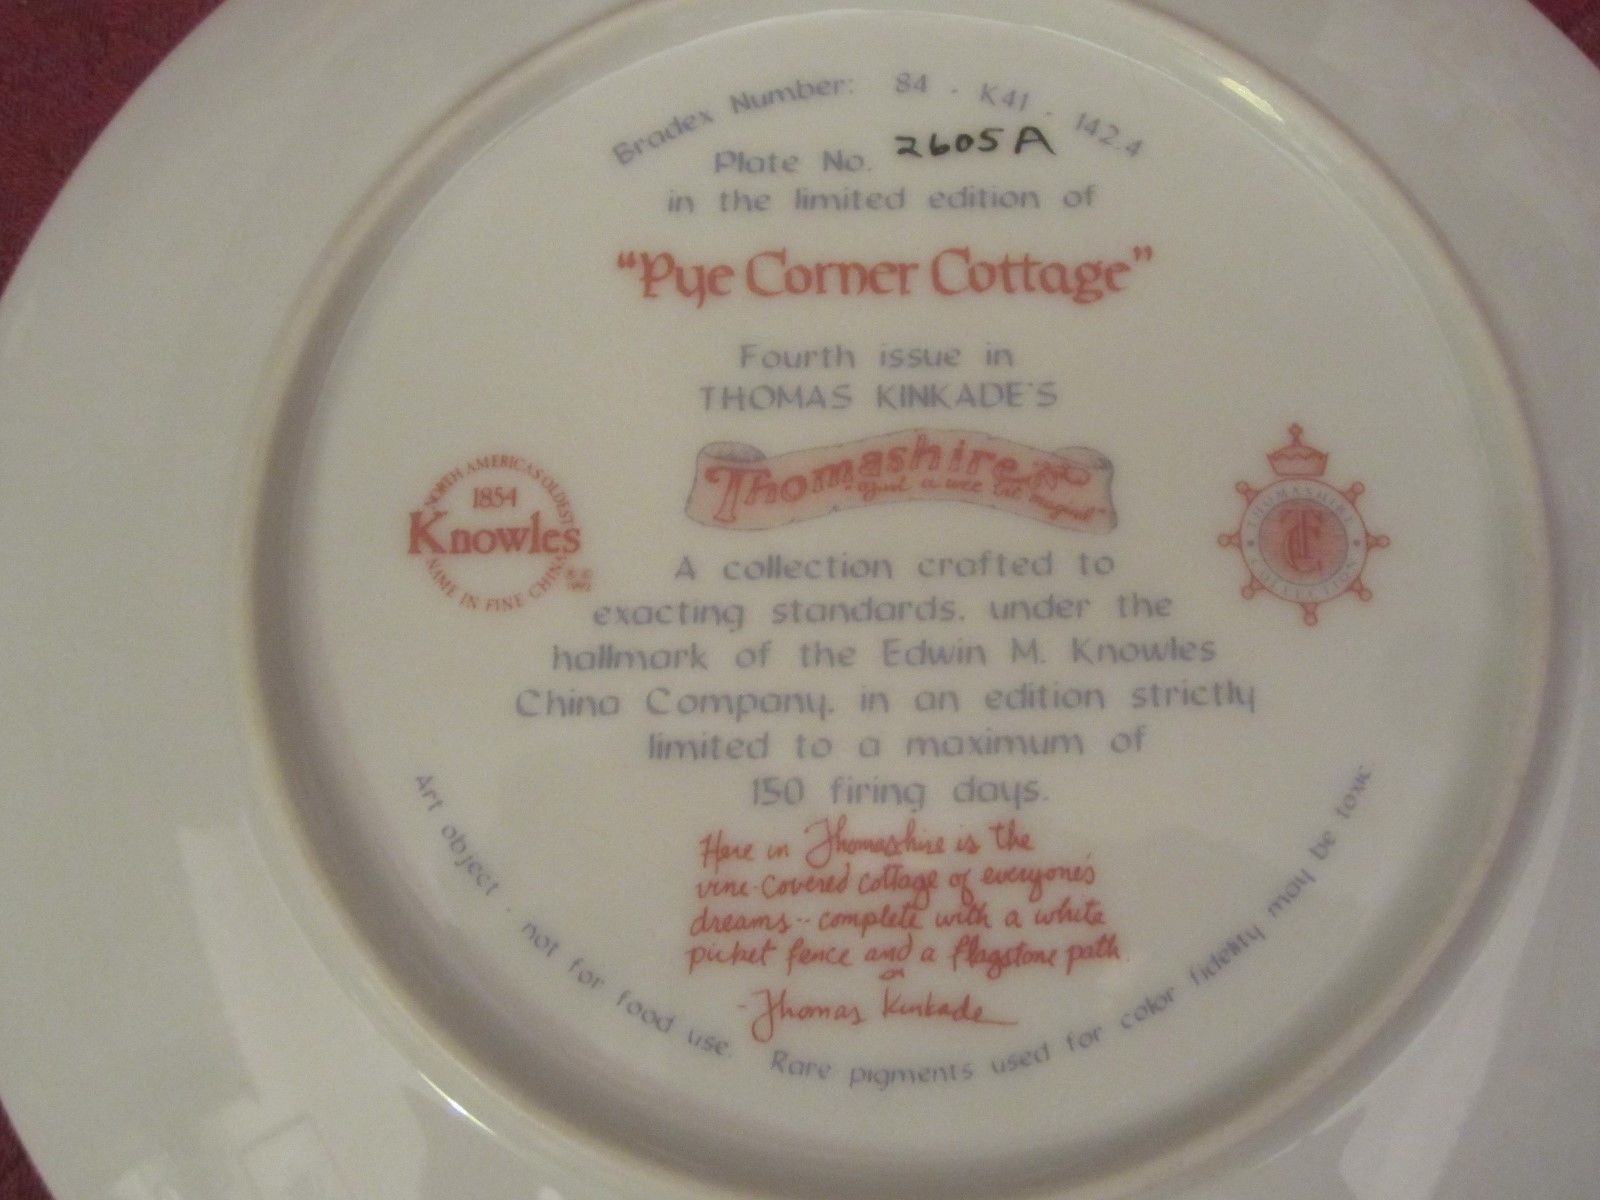 Jobe Edwin M Knowles "Sharing" Collectable Plate Mimi Jobe 1990 